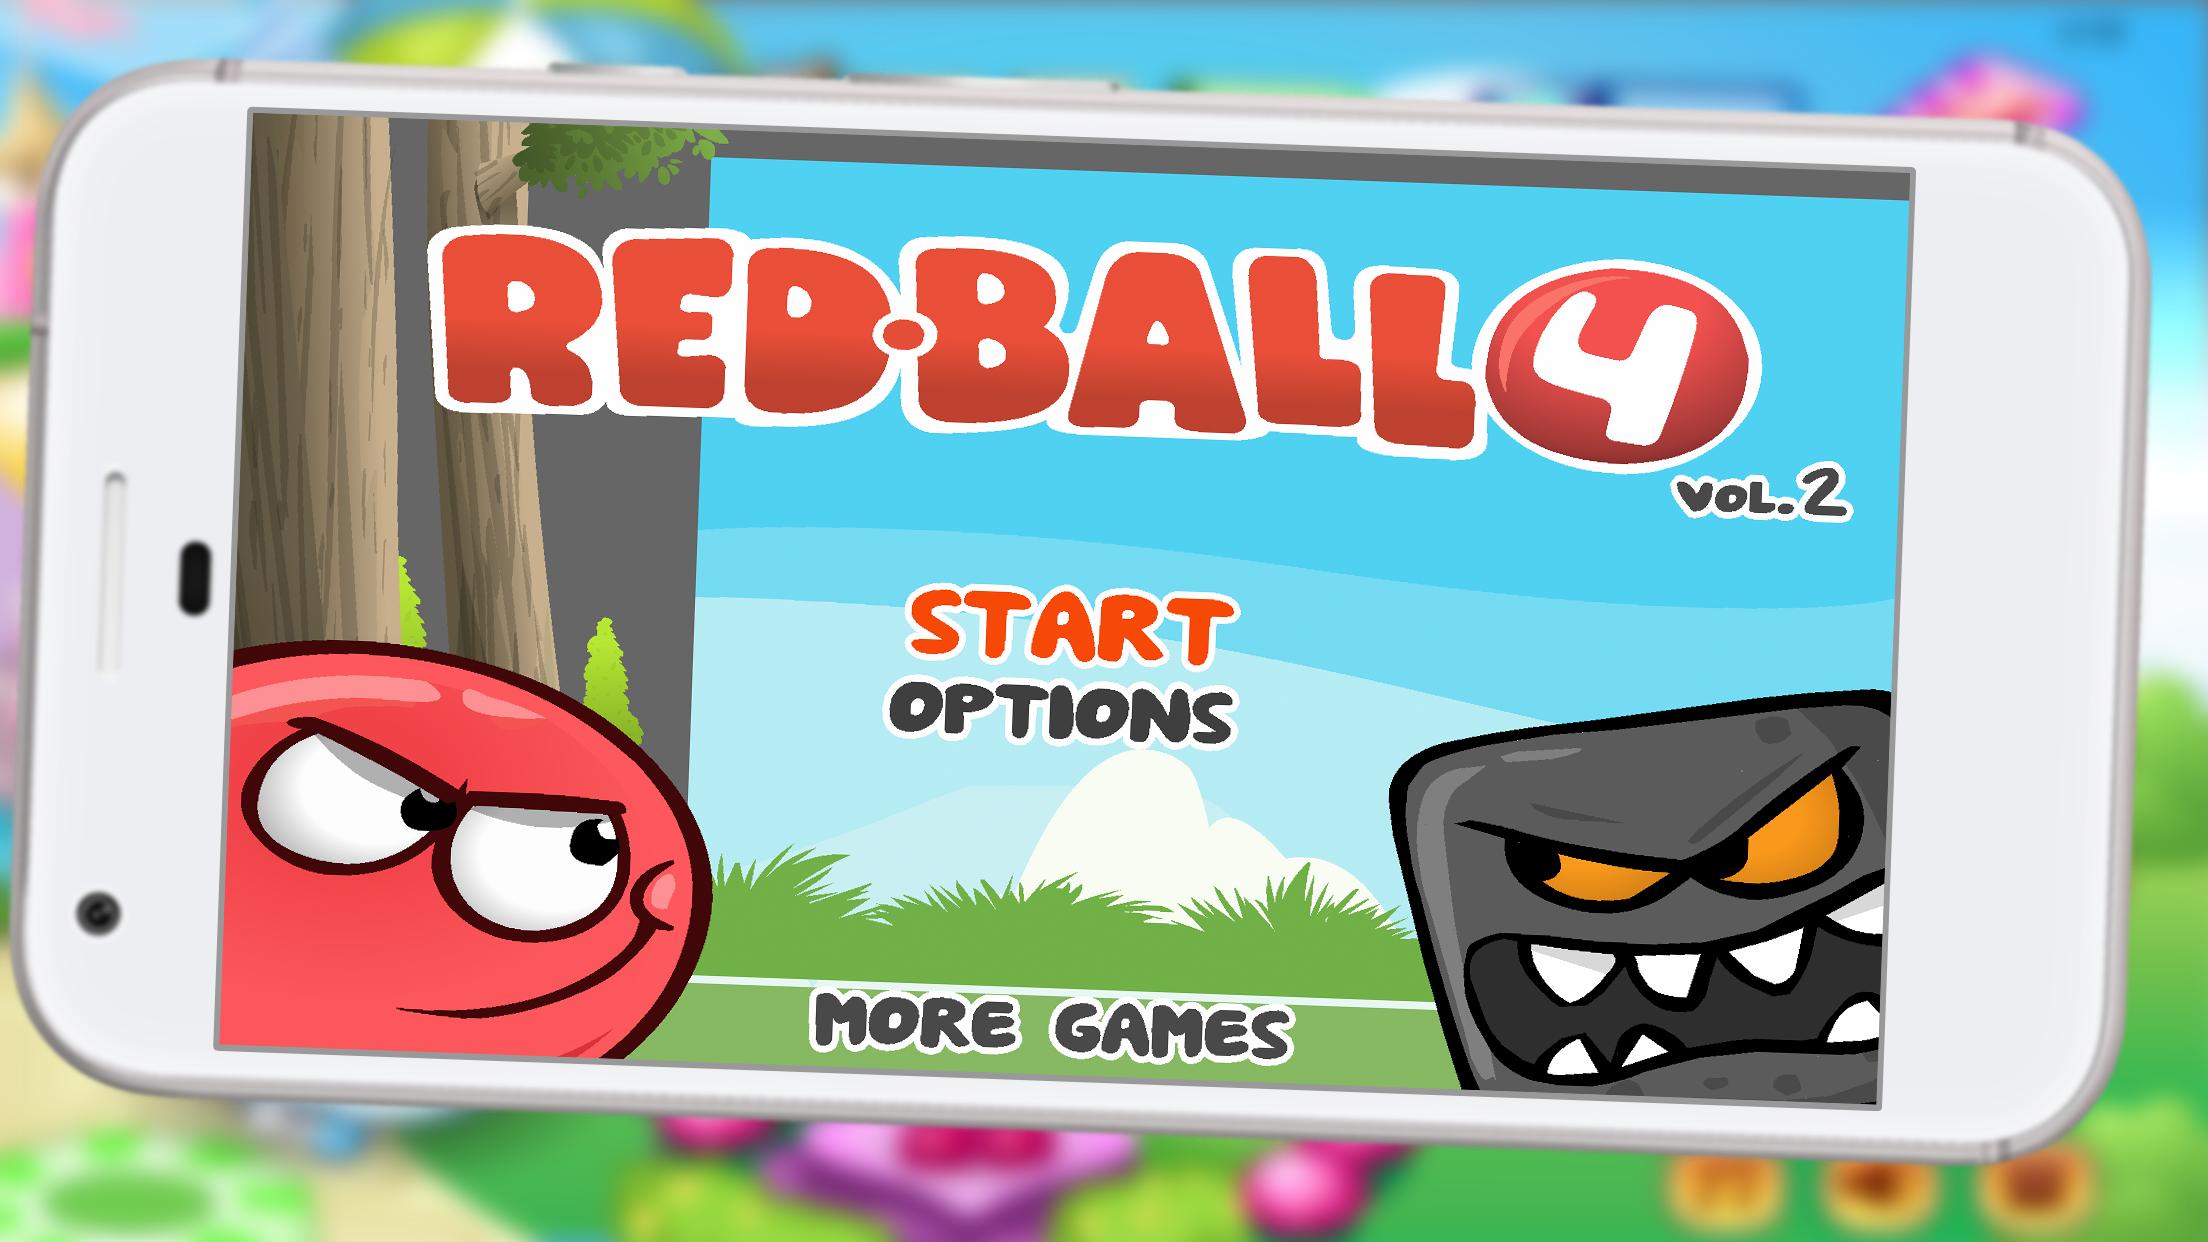 Red Ball Adventure 4: Big Ball Volume 2 for Android - APK Download